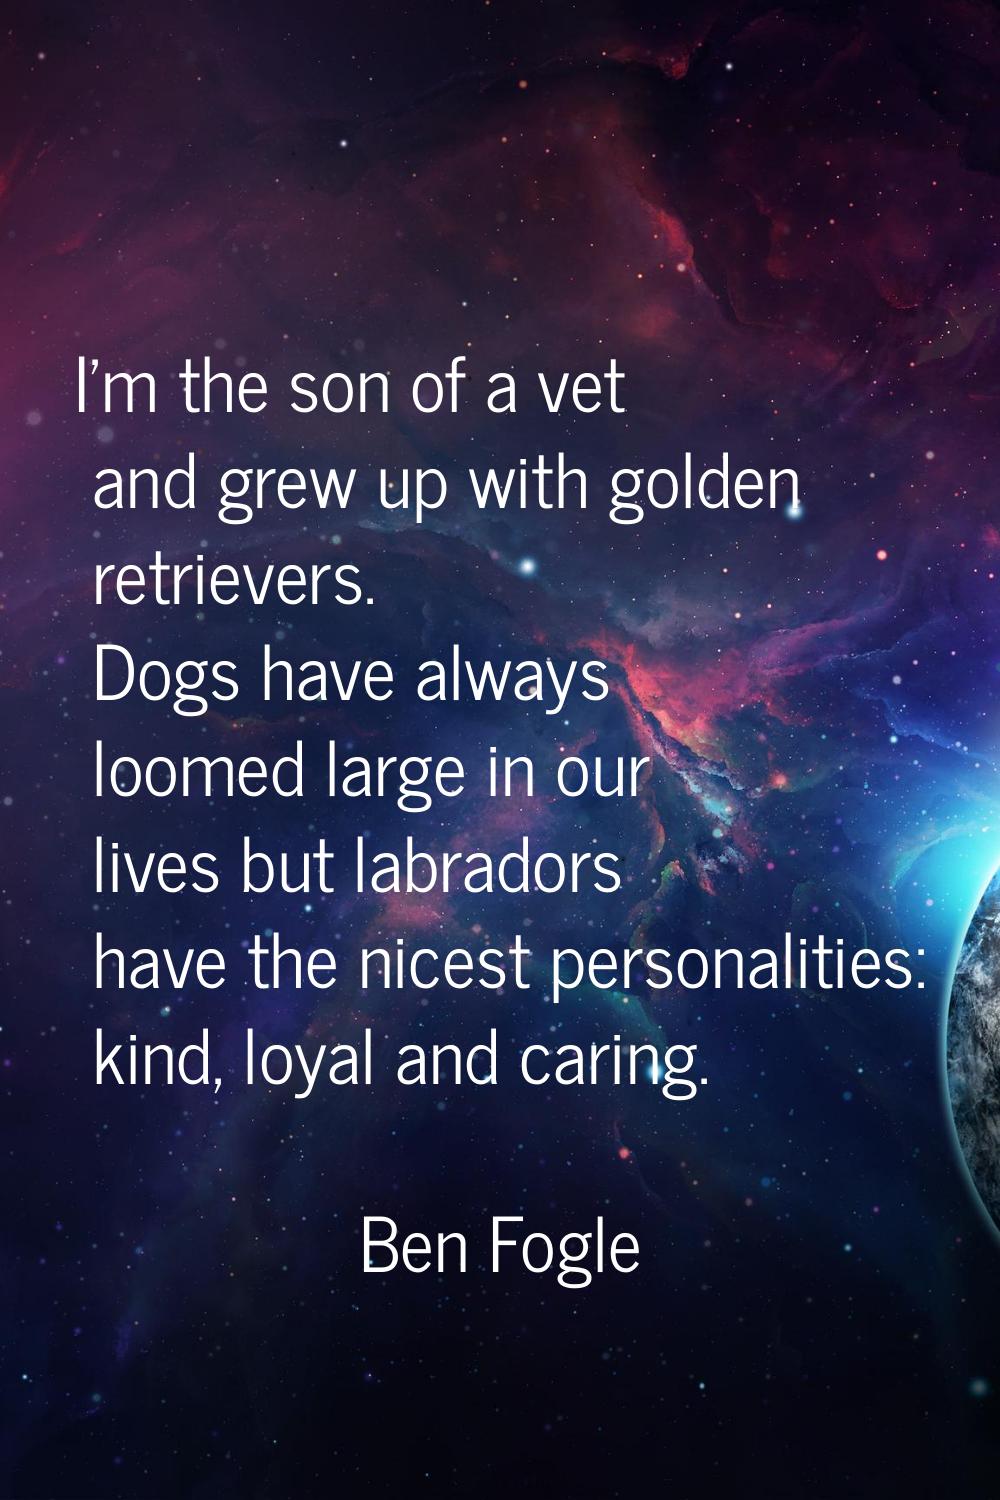 I'm the son of a vet and grew up with golden retrievers. Dogs have always loomed large in our lives